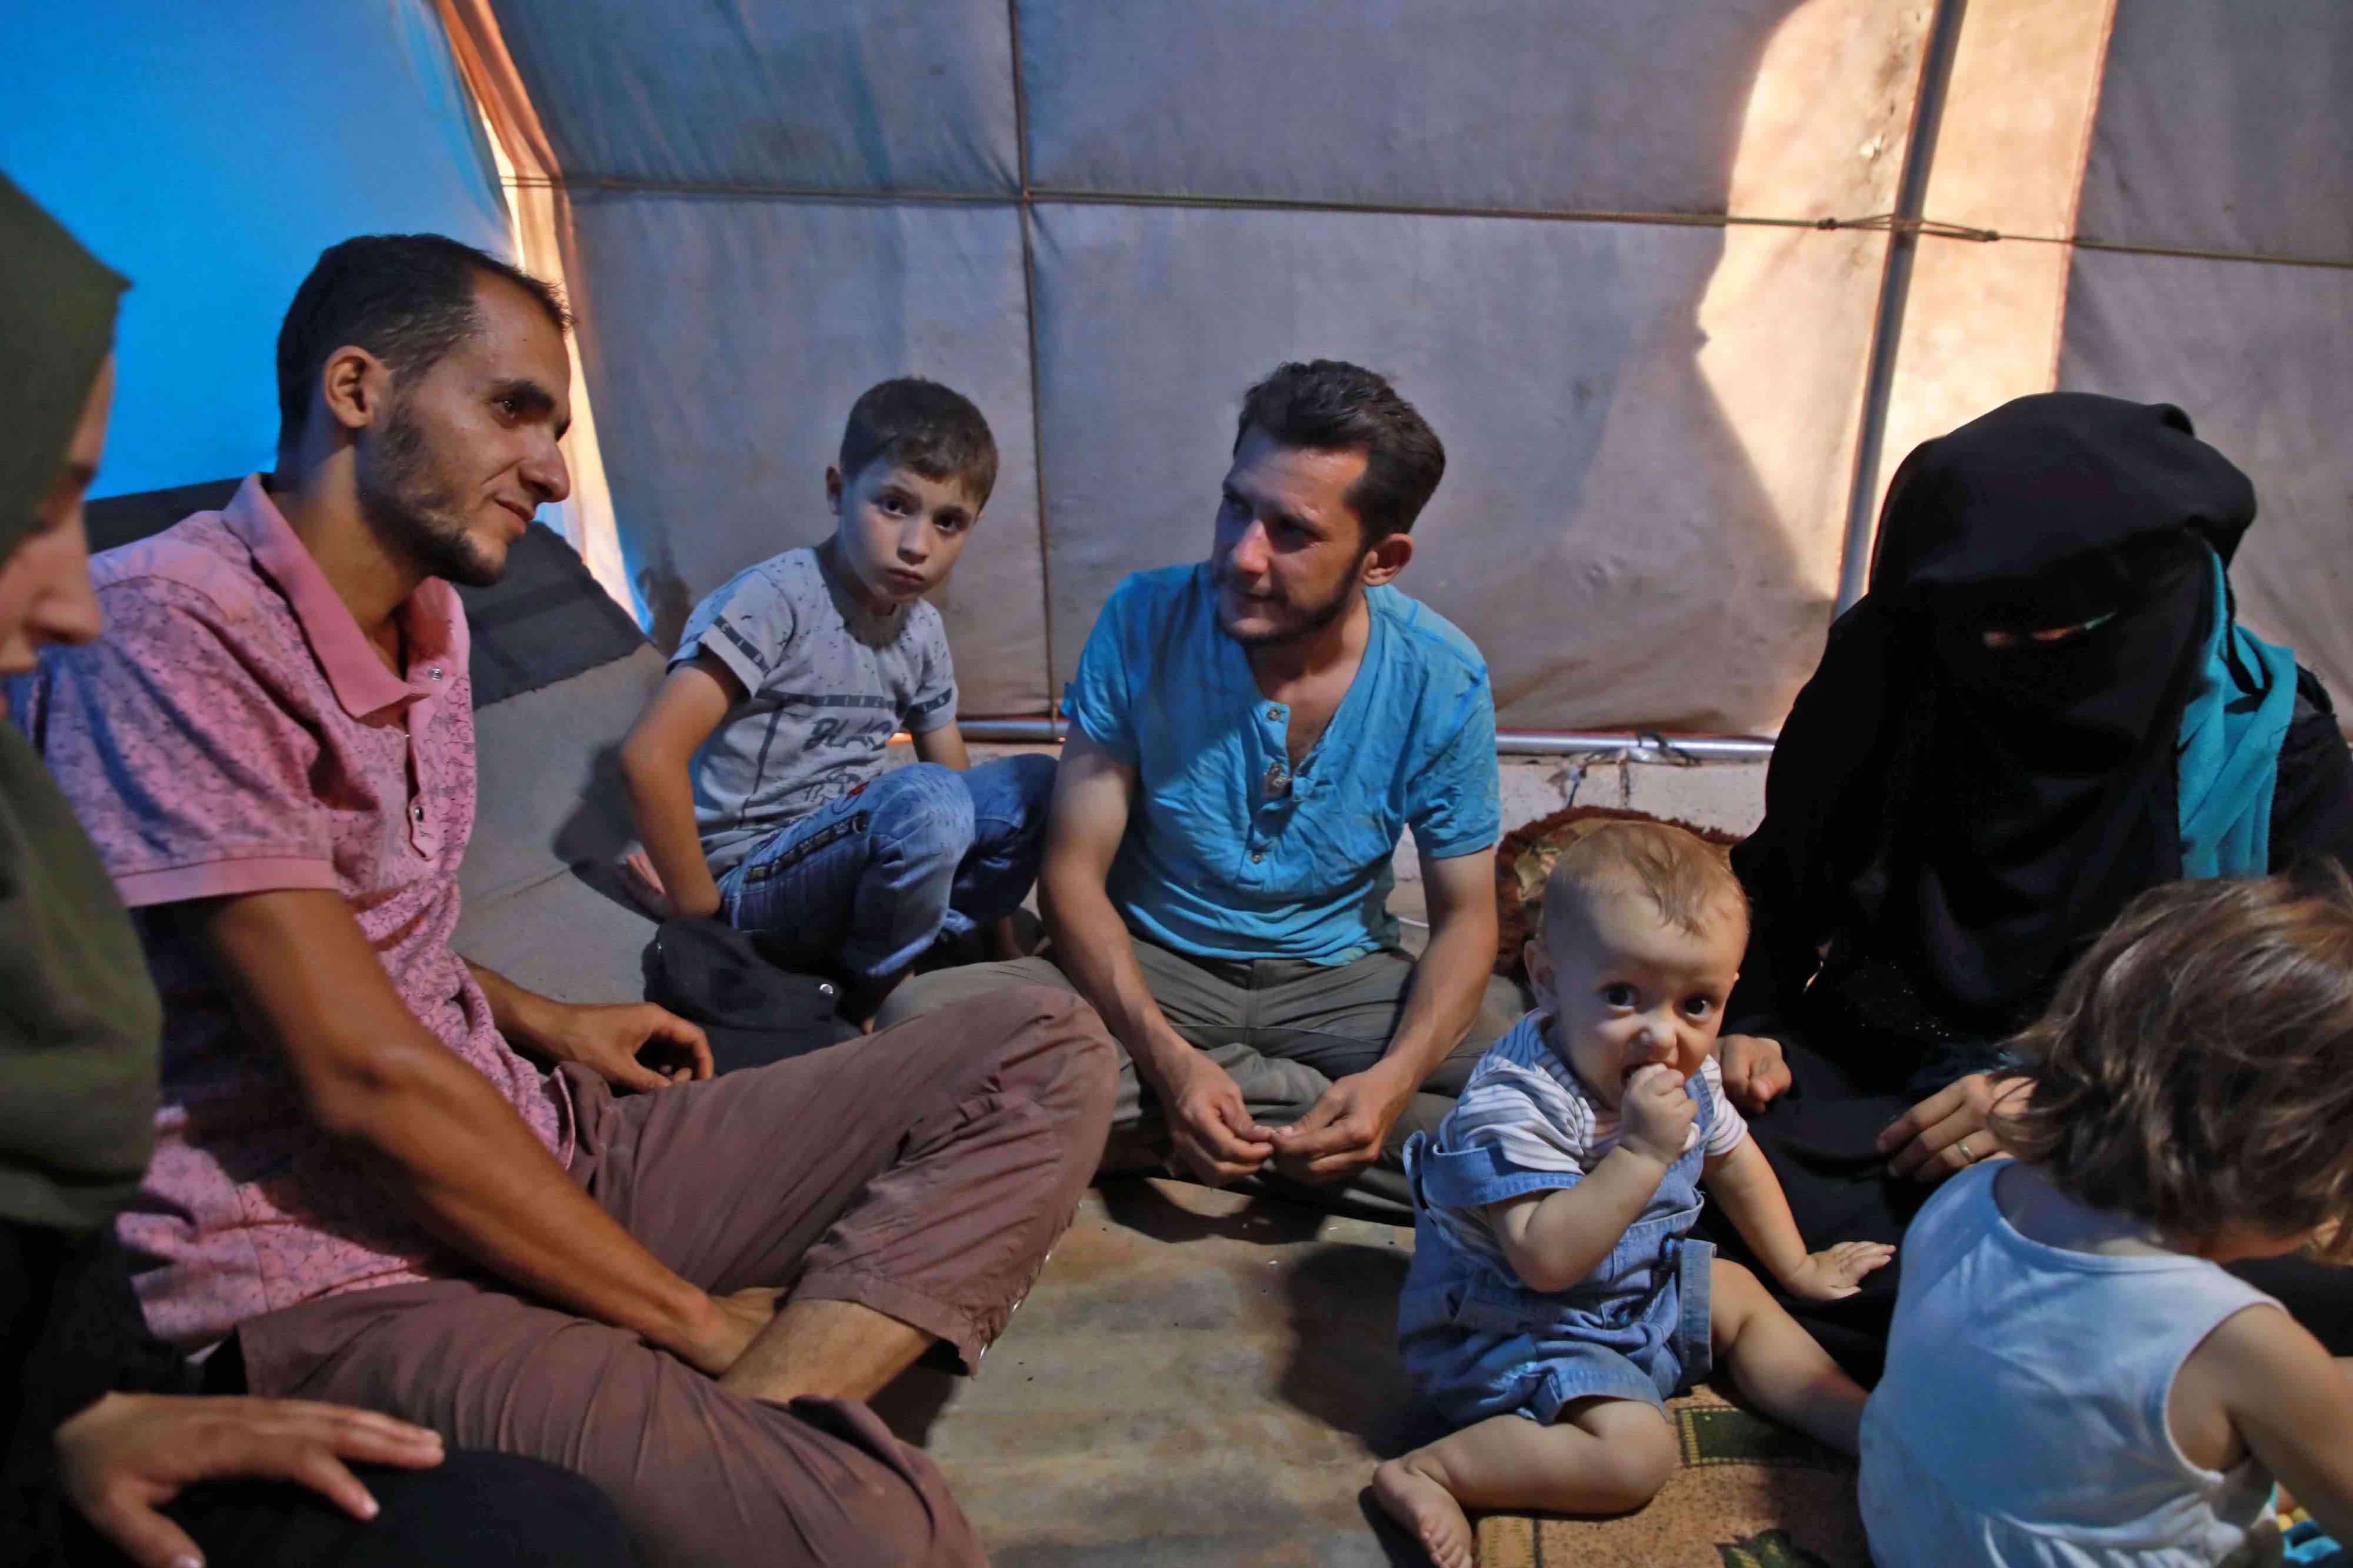 Turkey hosts the most Syrian refugees in the world at 3.6 million